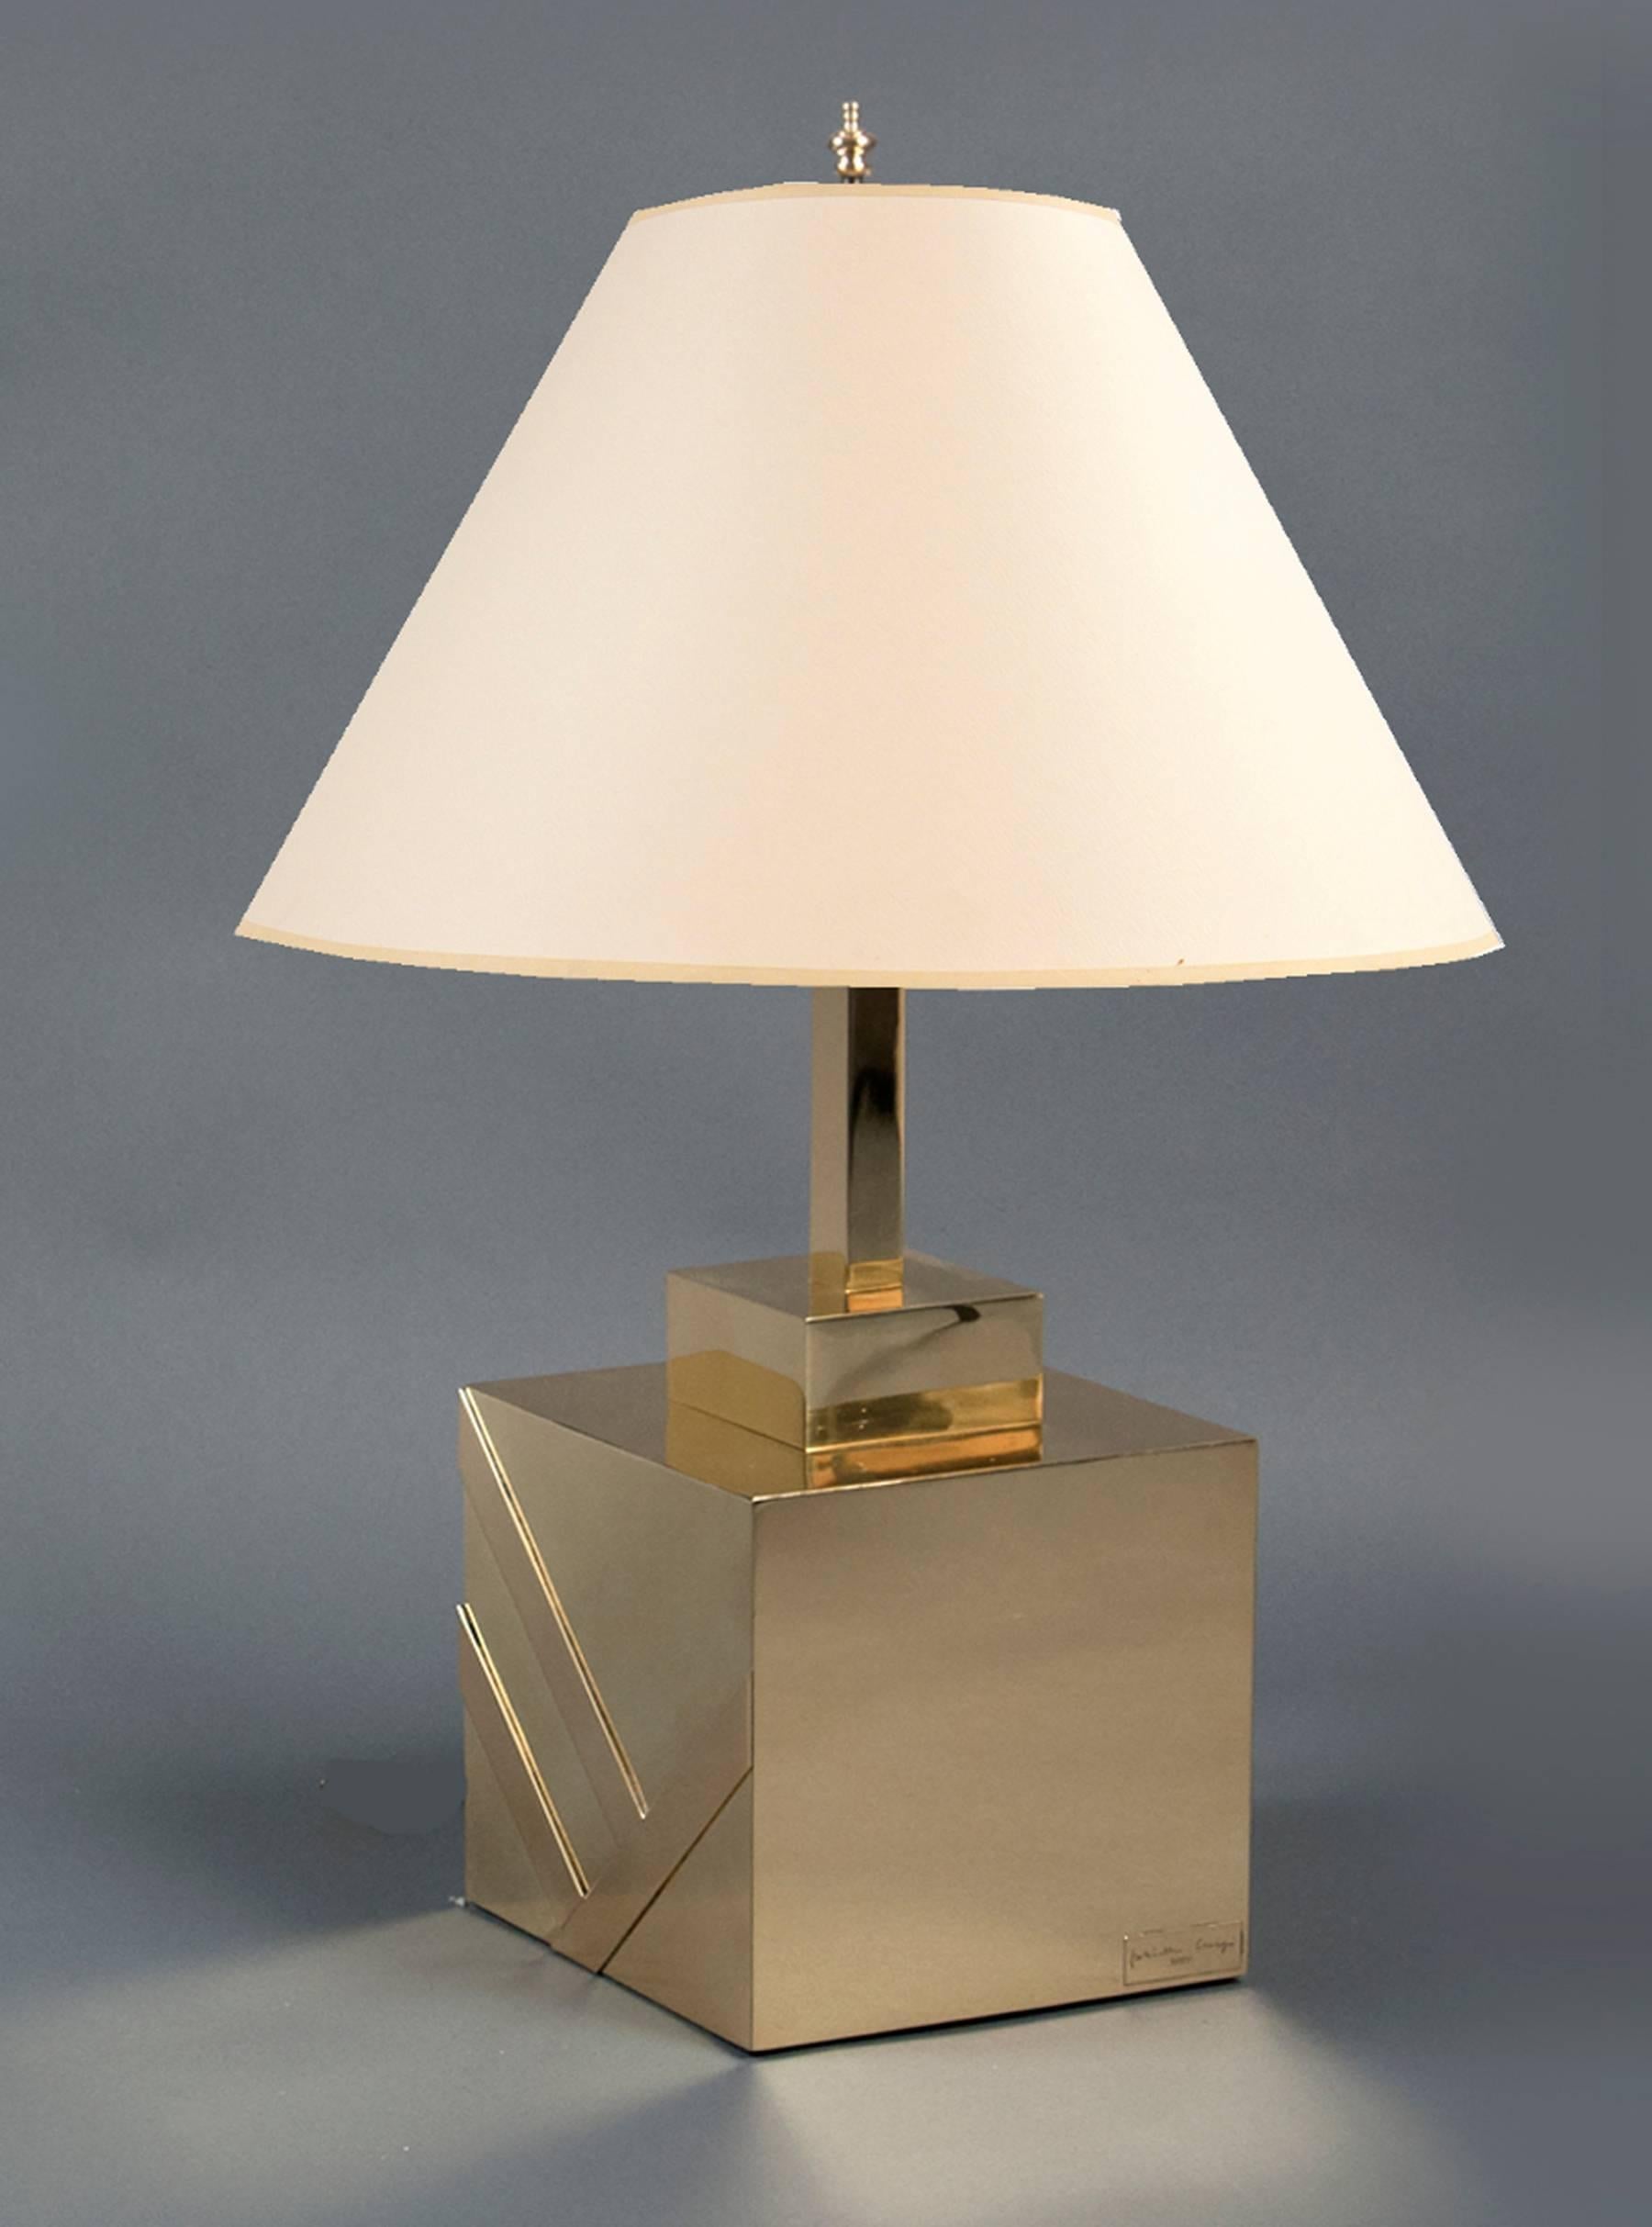 Polished brass cubic base over a wood core, the brass decorated with a diagonal design. Height (with shade): 34